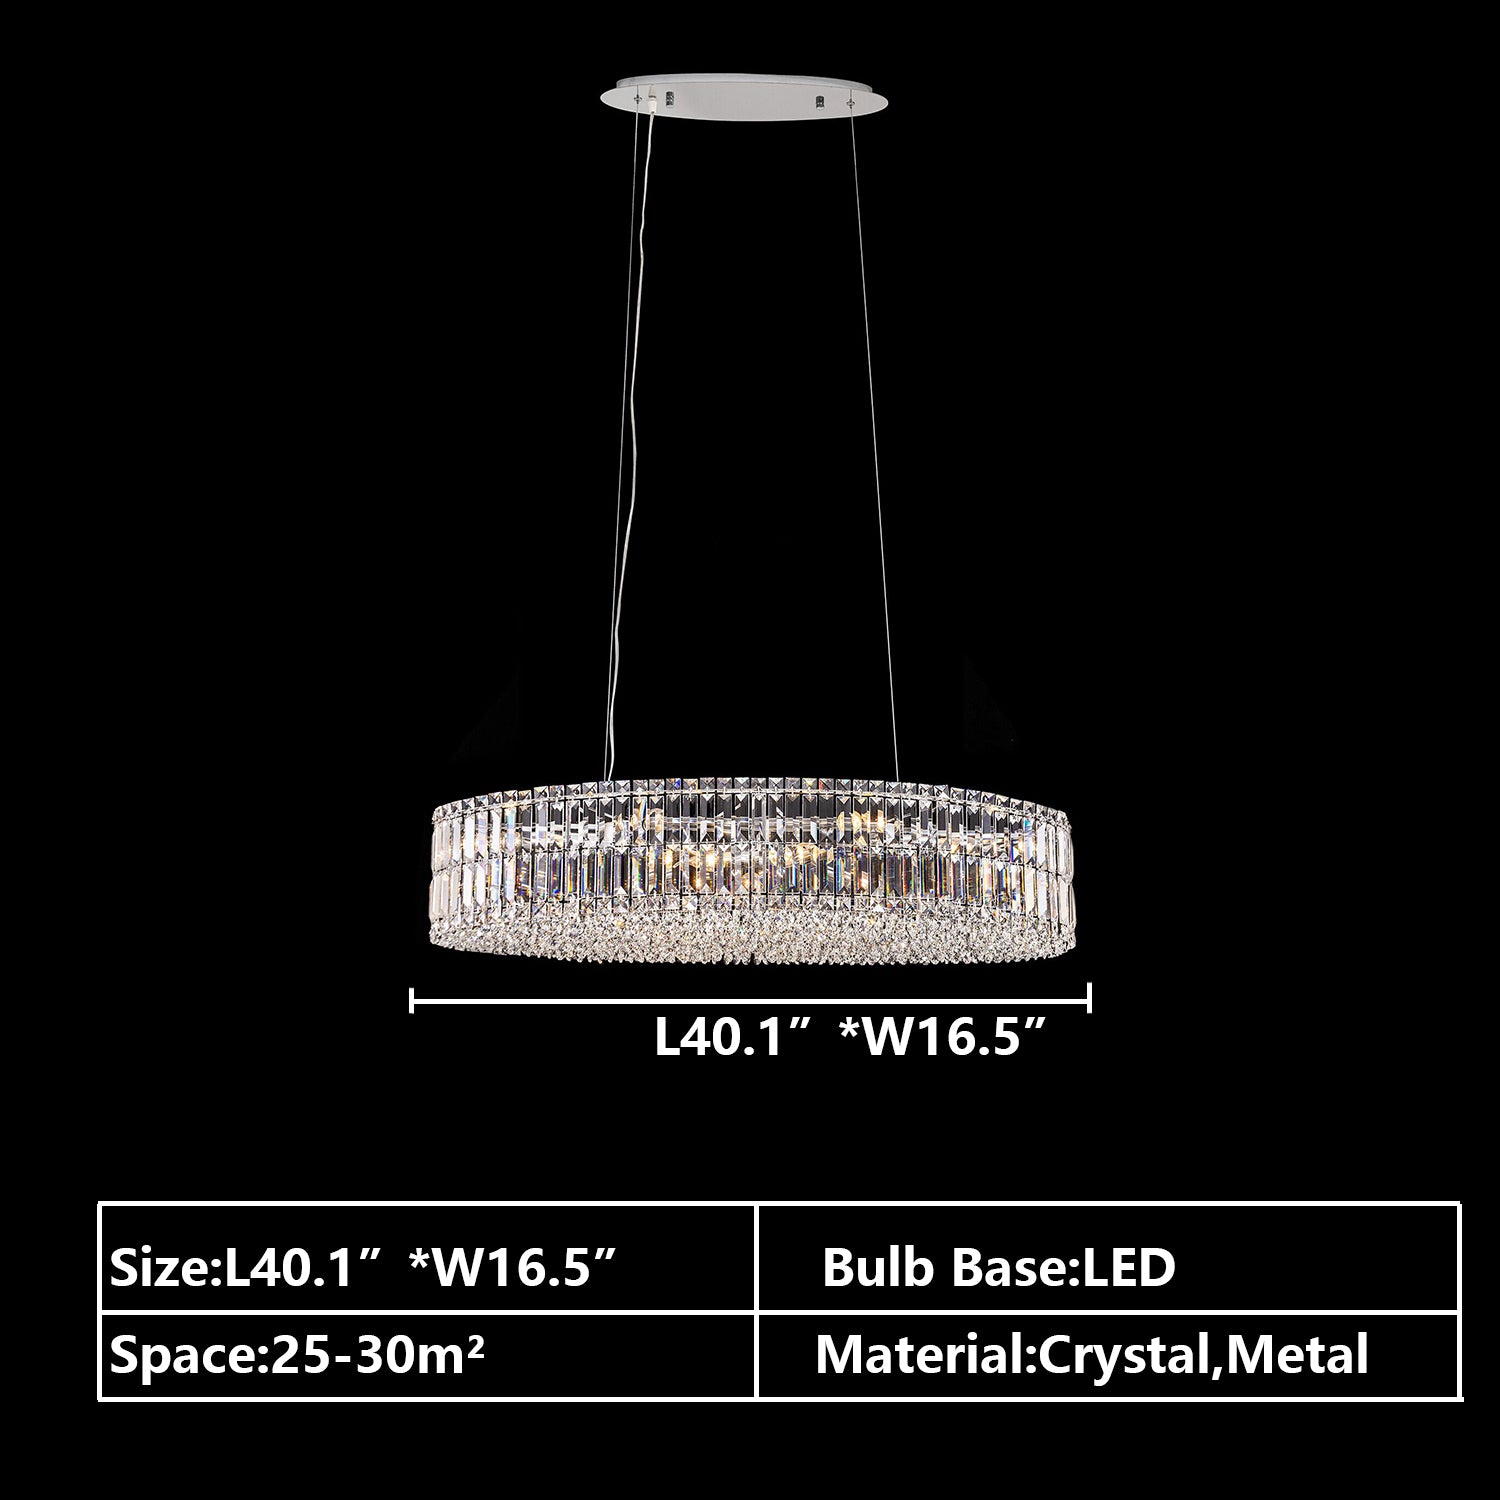 Oval:L40.1"*W16.5" chandelier,chandeliers,pendant,round,oval,ceiling,crystal,metal,chrome,silver,clear crystal,adjustable,chain,light luxury,luxury,living room,dining room,foyer,entrys,hallway,bathroom,bedroom,home office